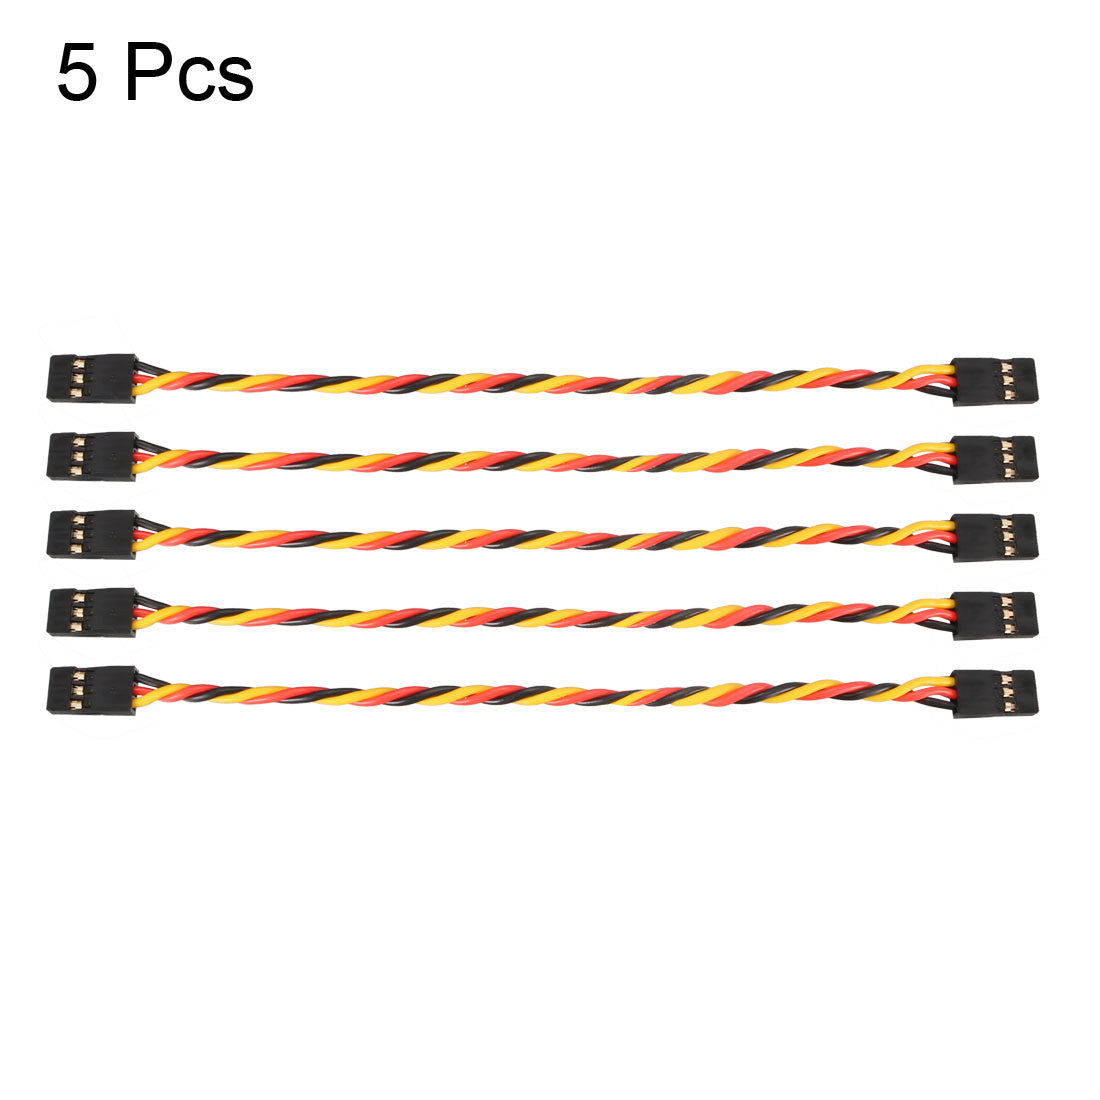 uxcell Uxcell 5Pcs 18.5CM 3-Pin Male to Male Twisted Servo Extension Cable Cord Connectors, 22AWG 60-Cores Wire for RC Futaba JR Servo